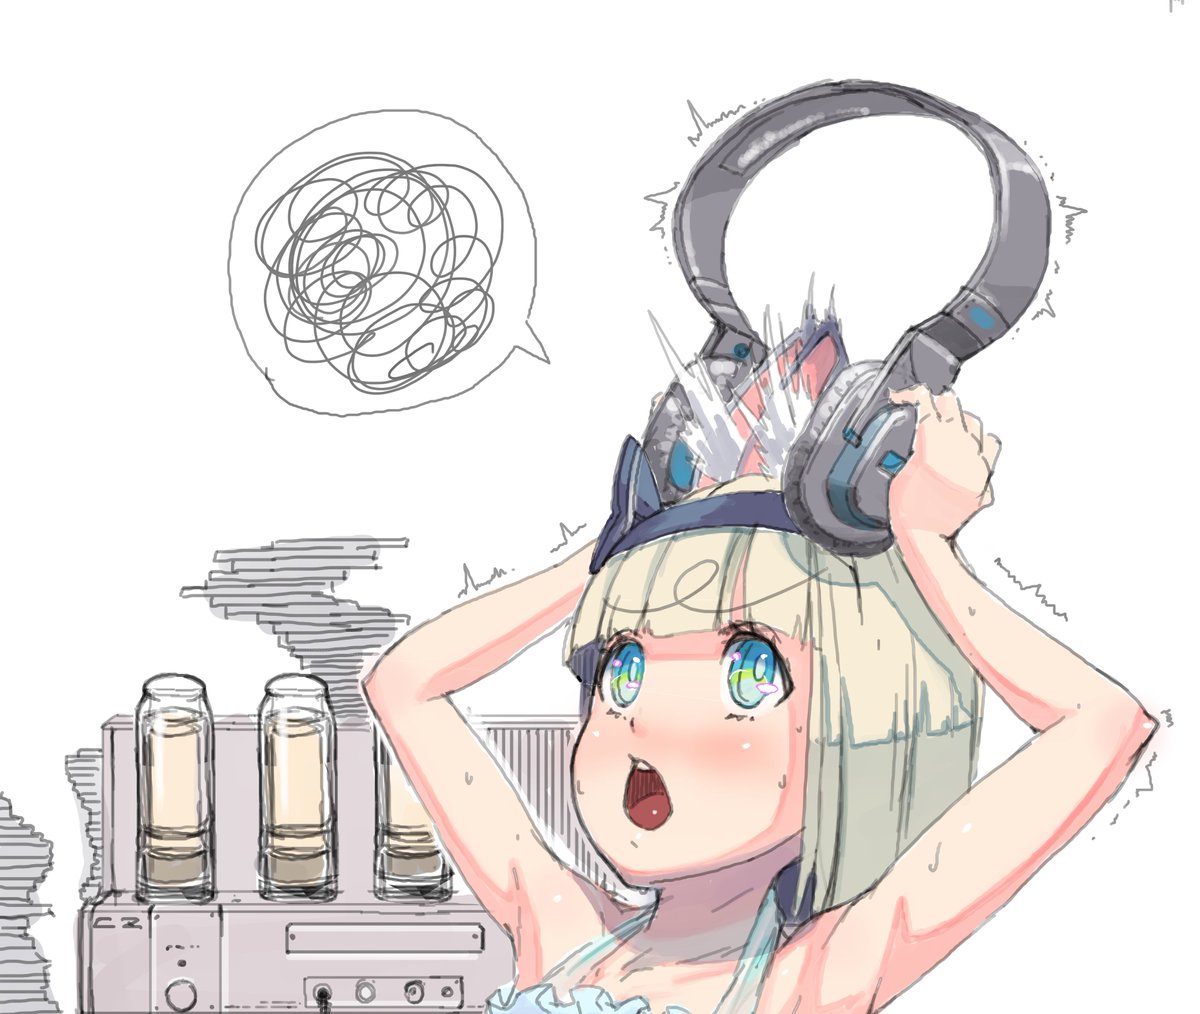 And here's a catgirl trying and failing to use human-style headphones on cat ears